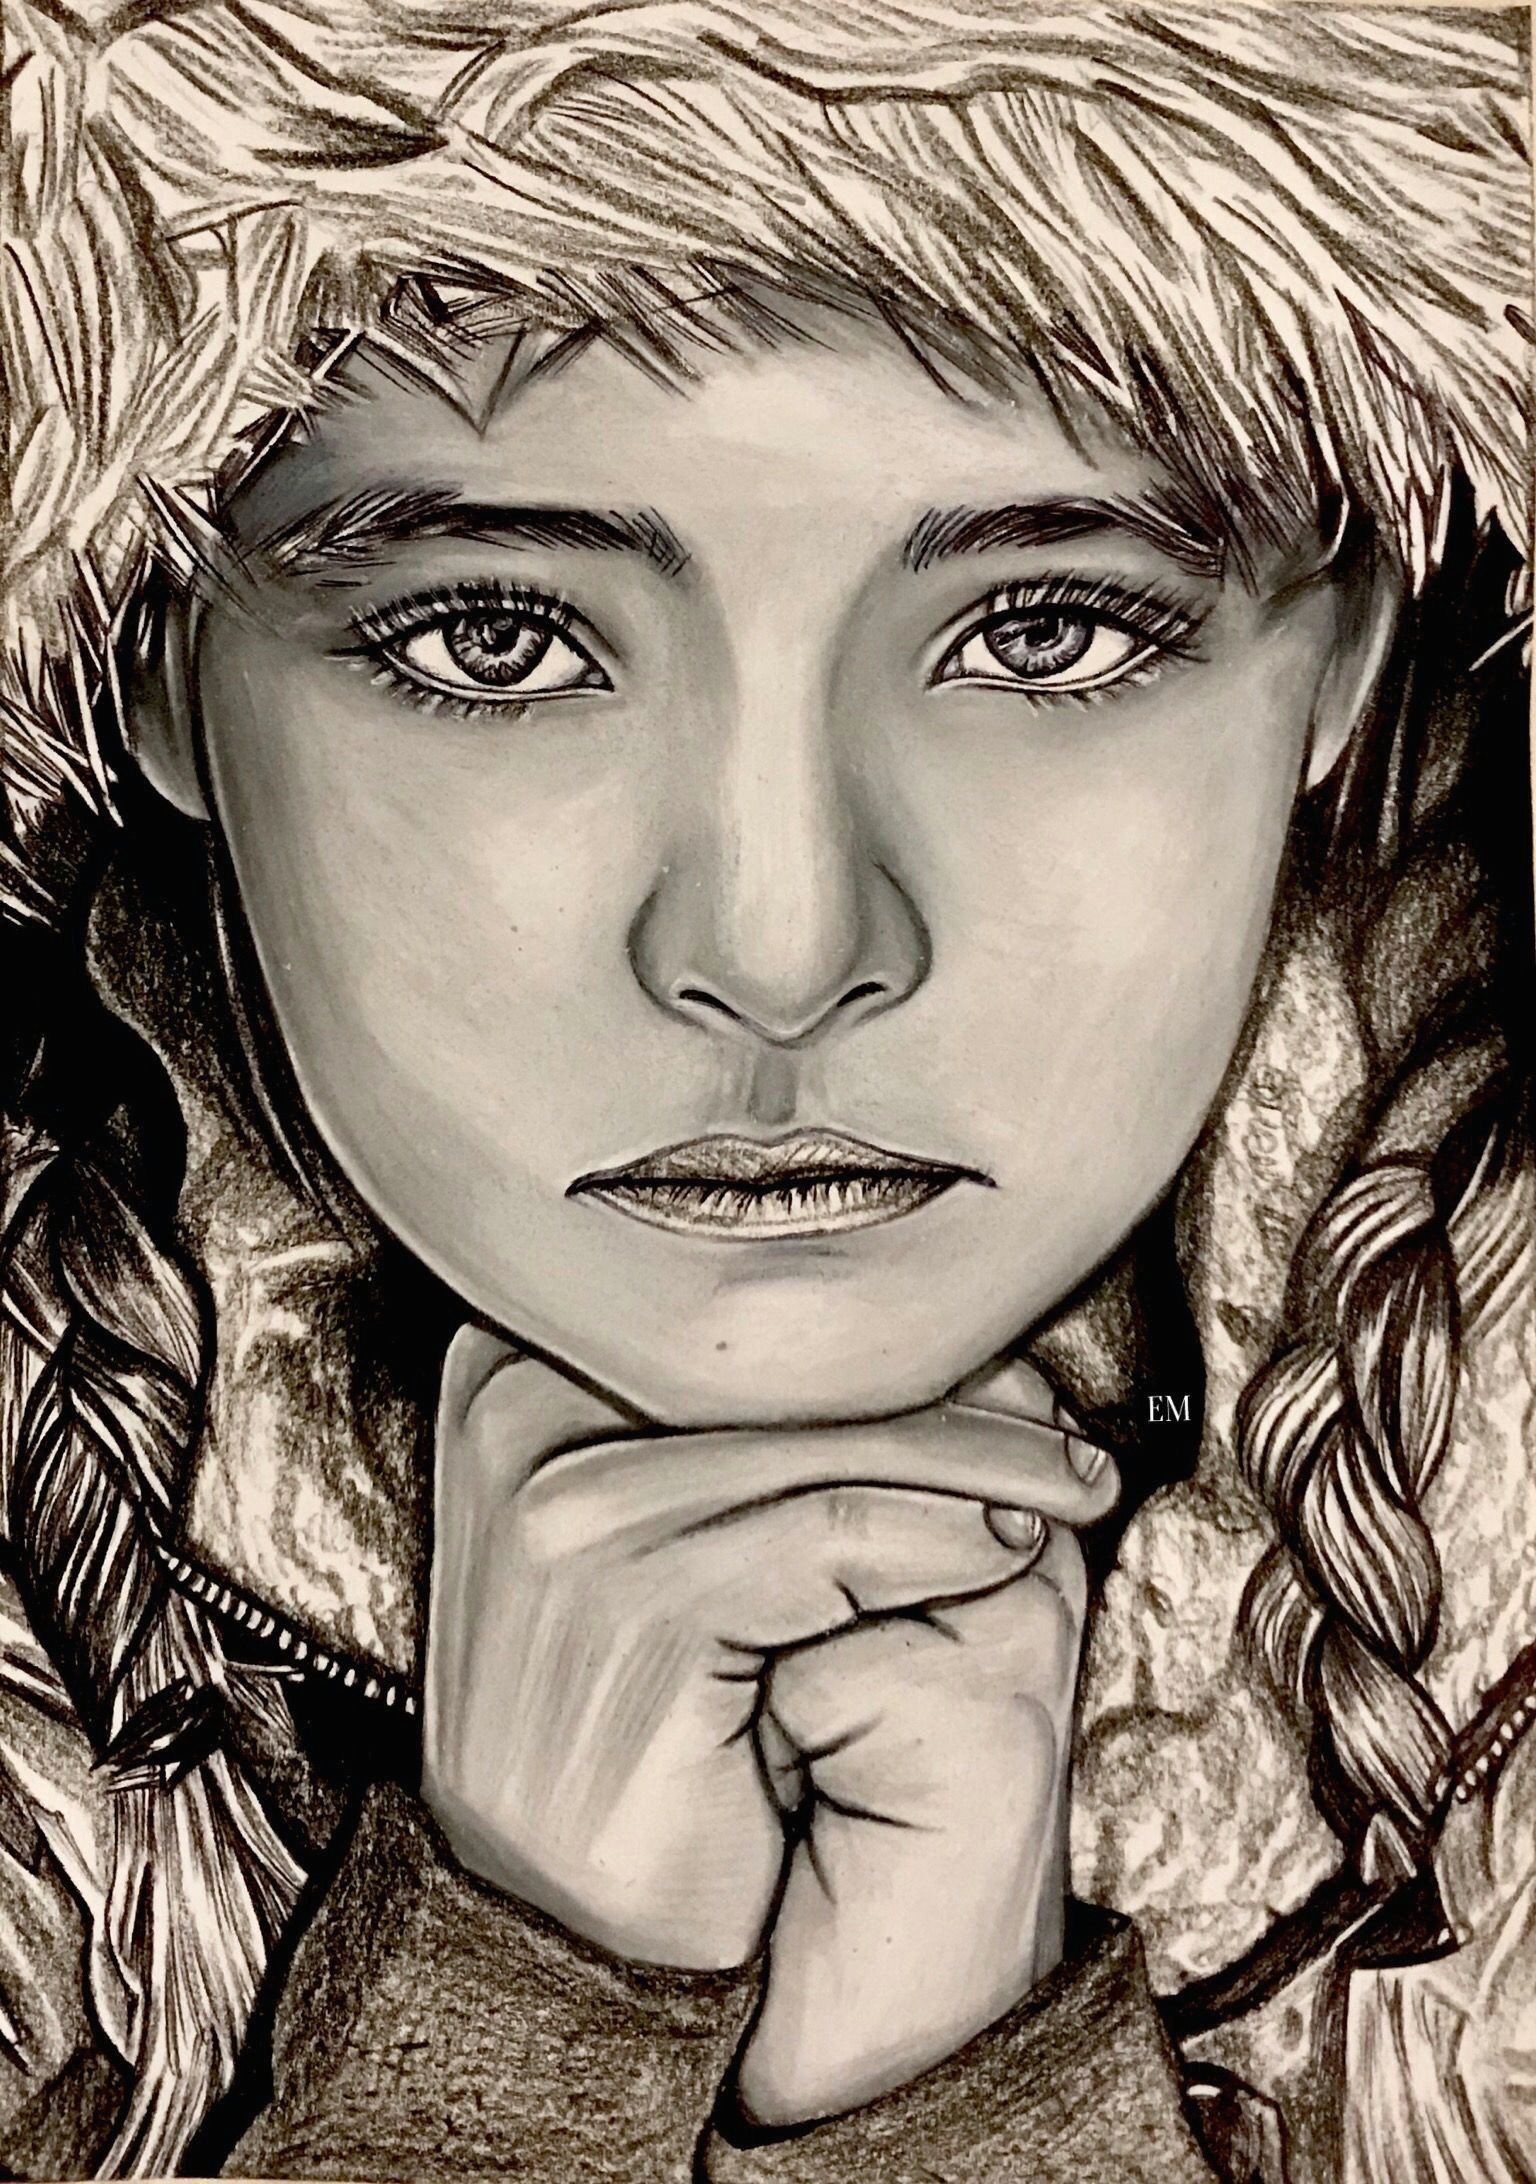 How to Draw Girl with Braids some Awesome Child Girl Braids Fur Hat Portrait Artwork